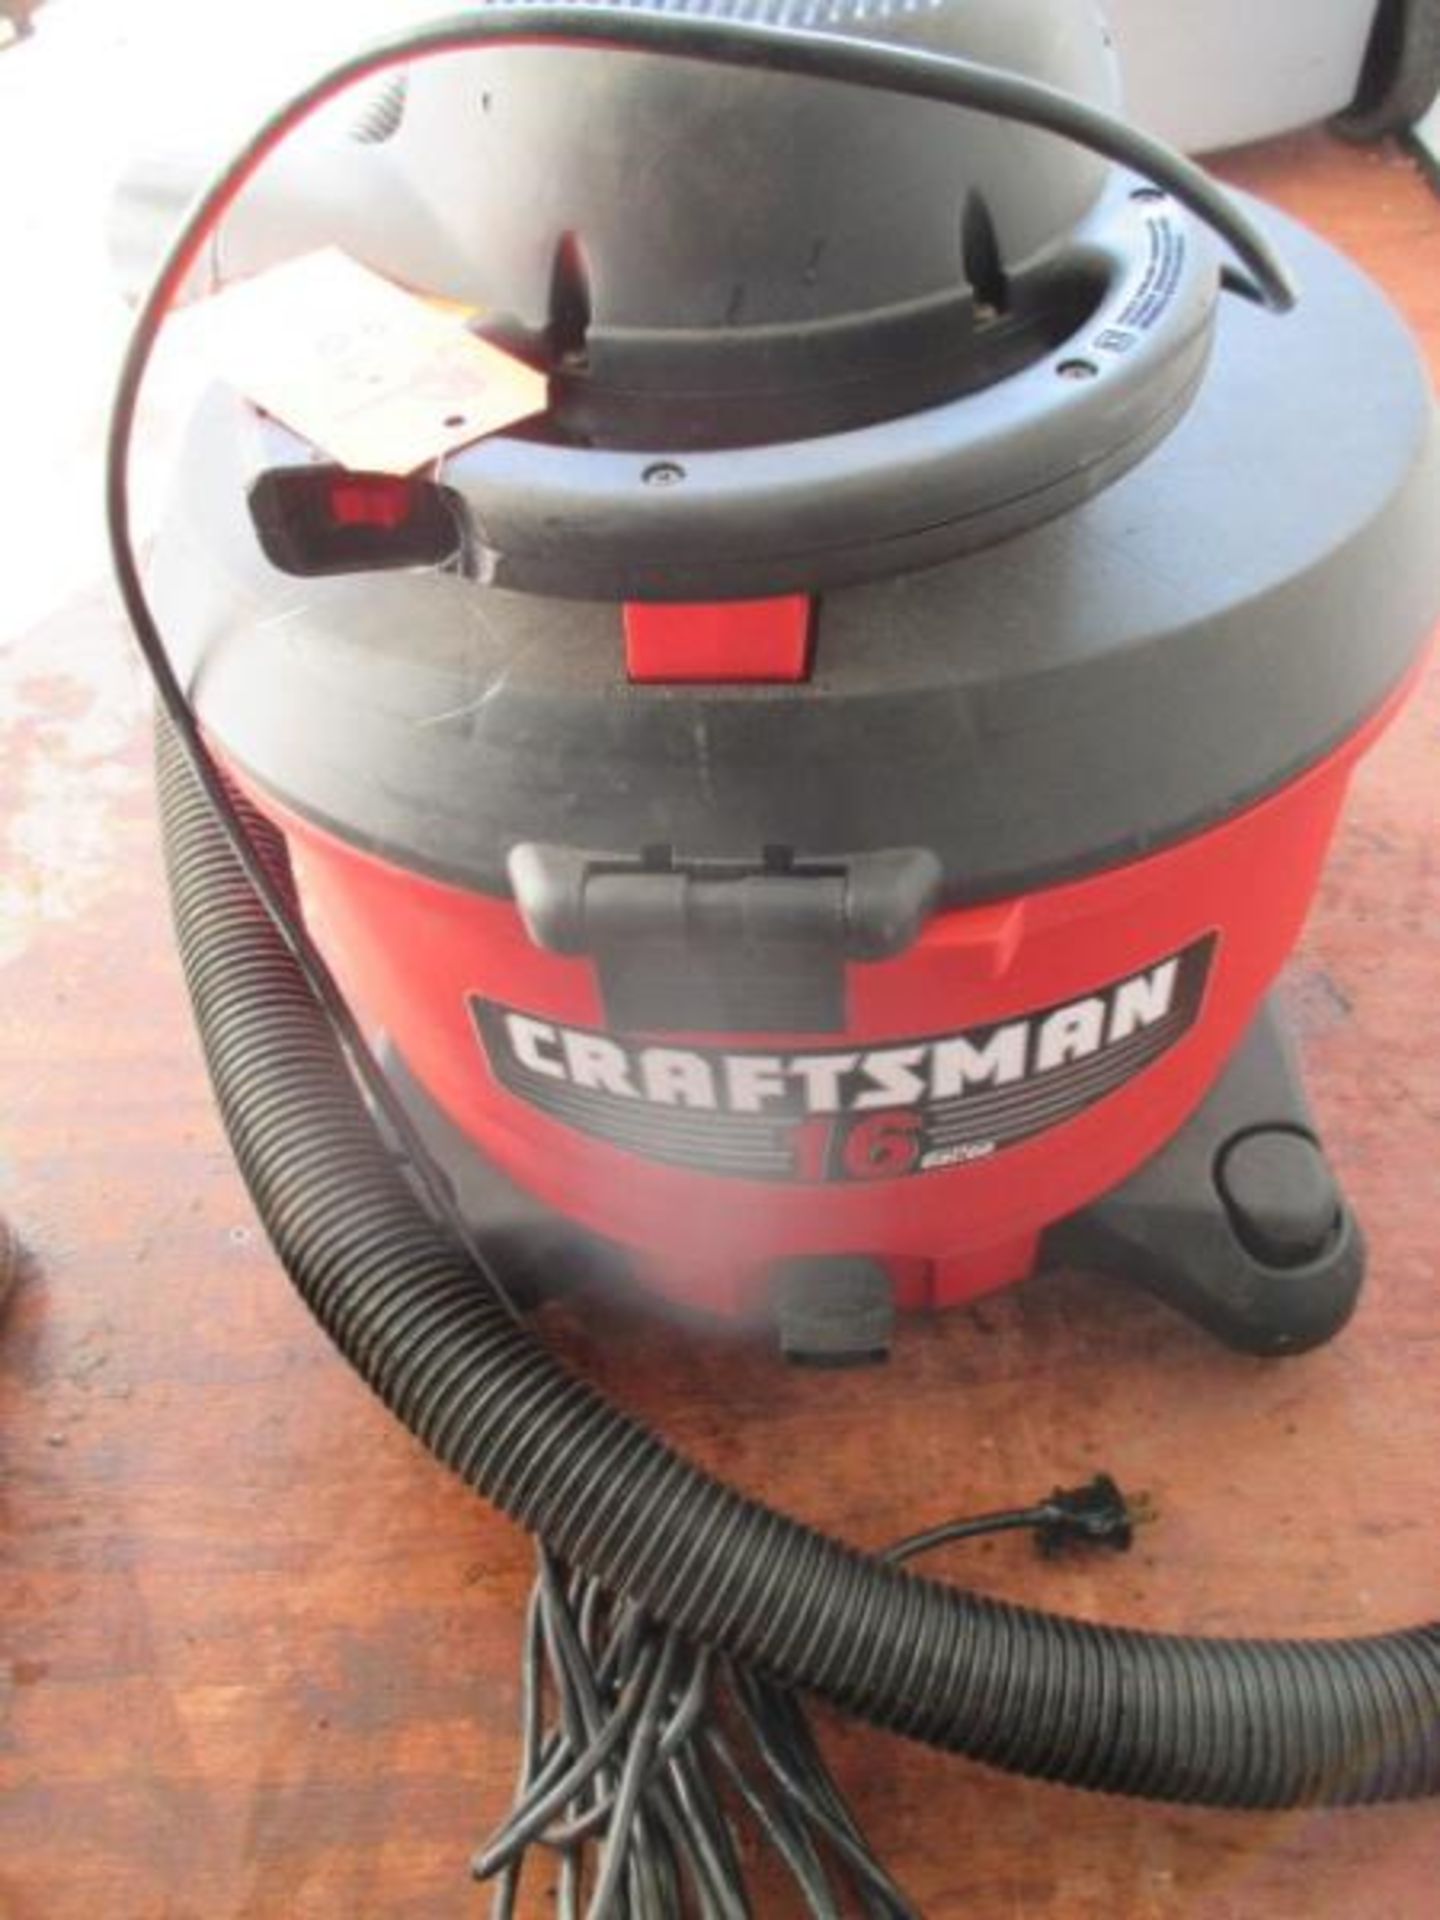 Crafsman Wet / Dry Vac, 16 Gallon, 6.25 Peak HP, 210 Blower MPH, Red 210 Blower MPH, Red